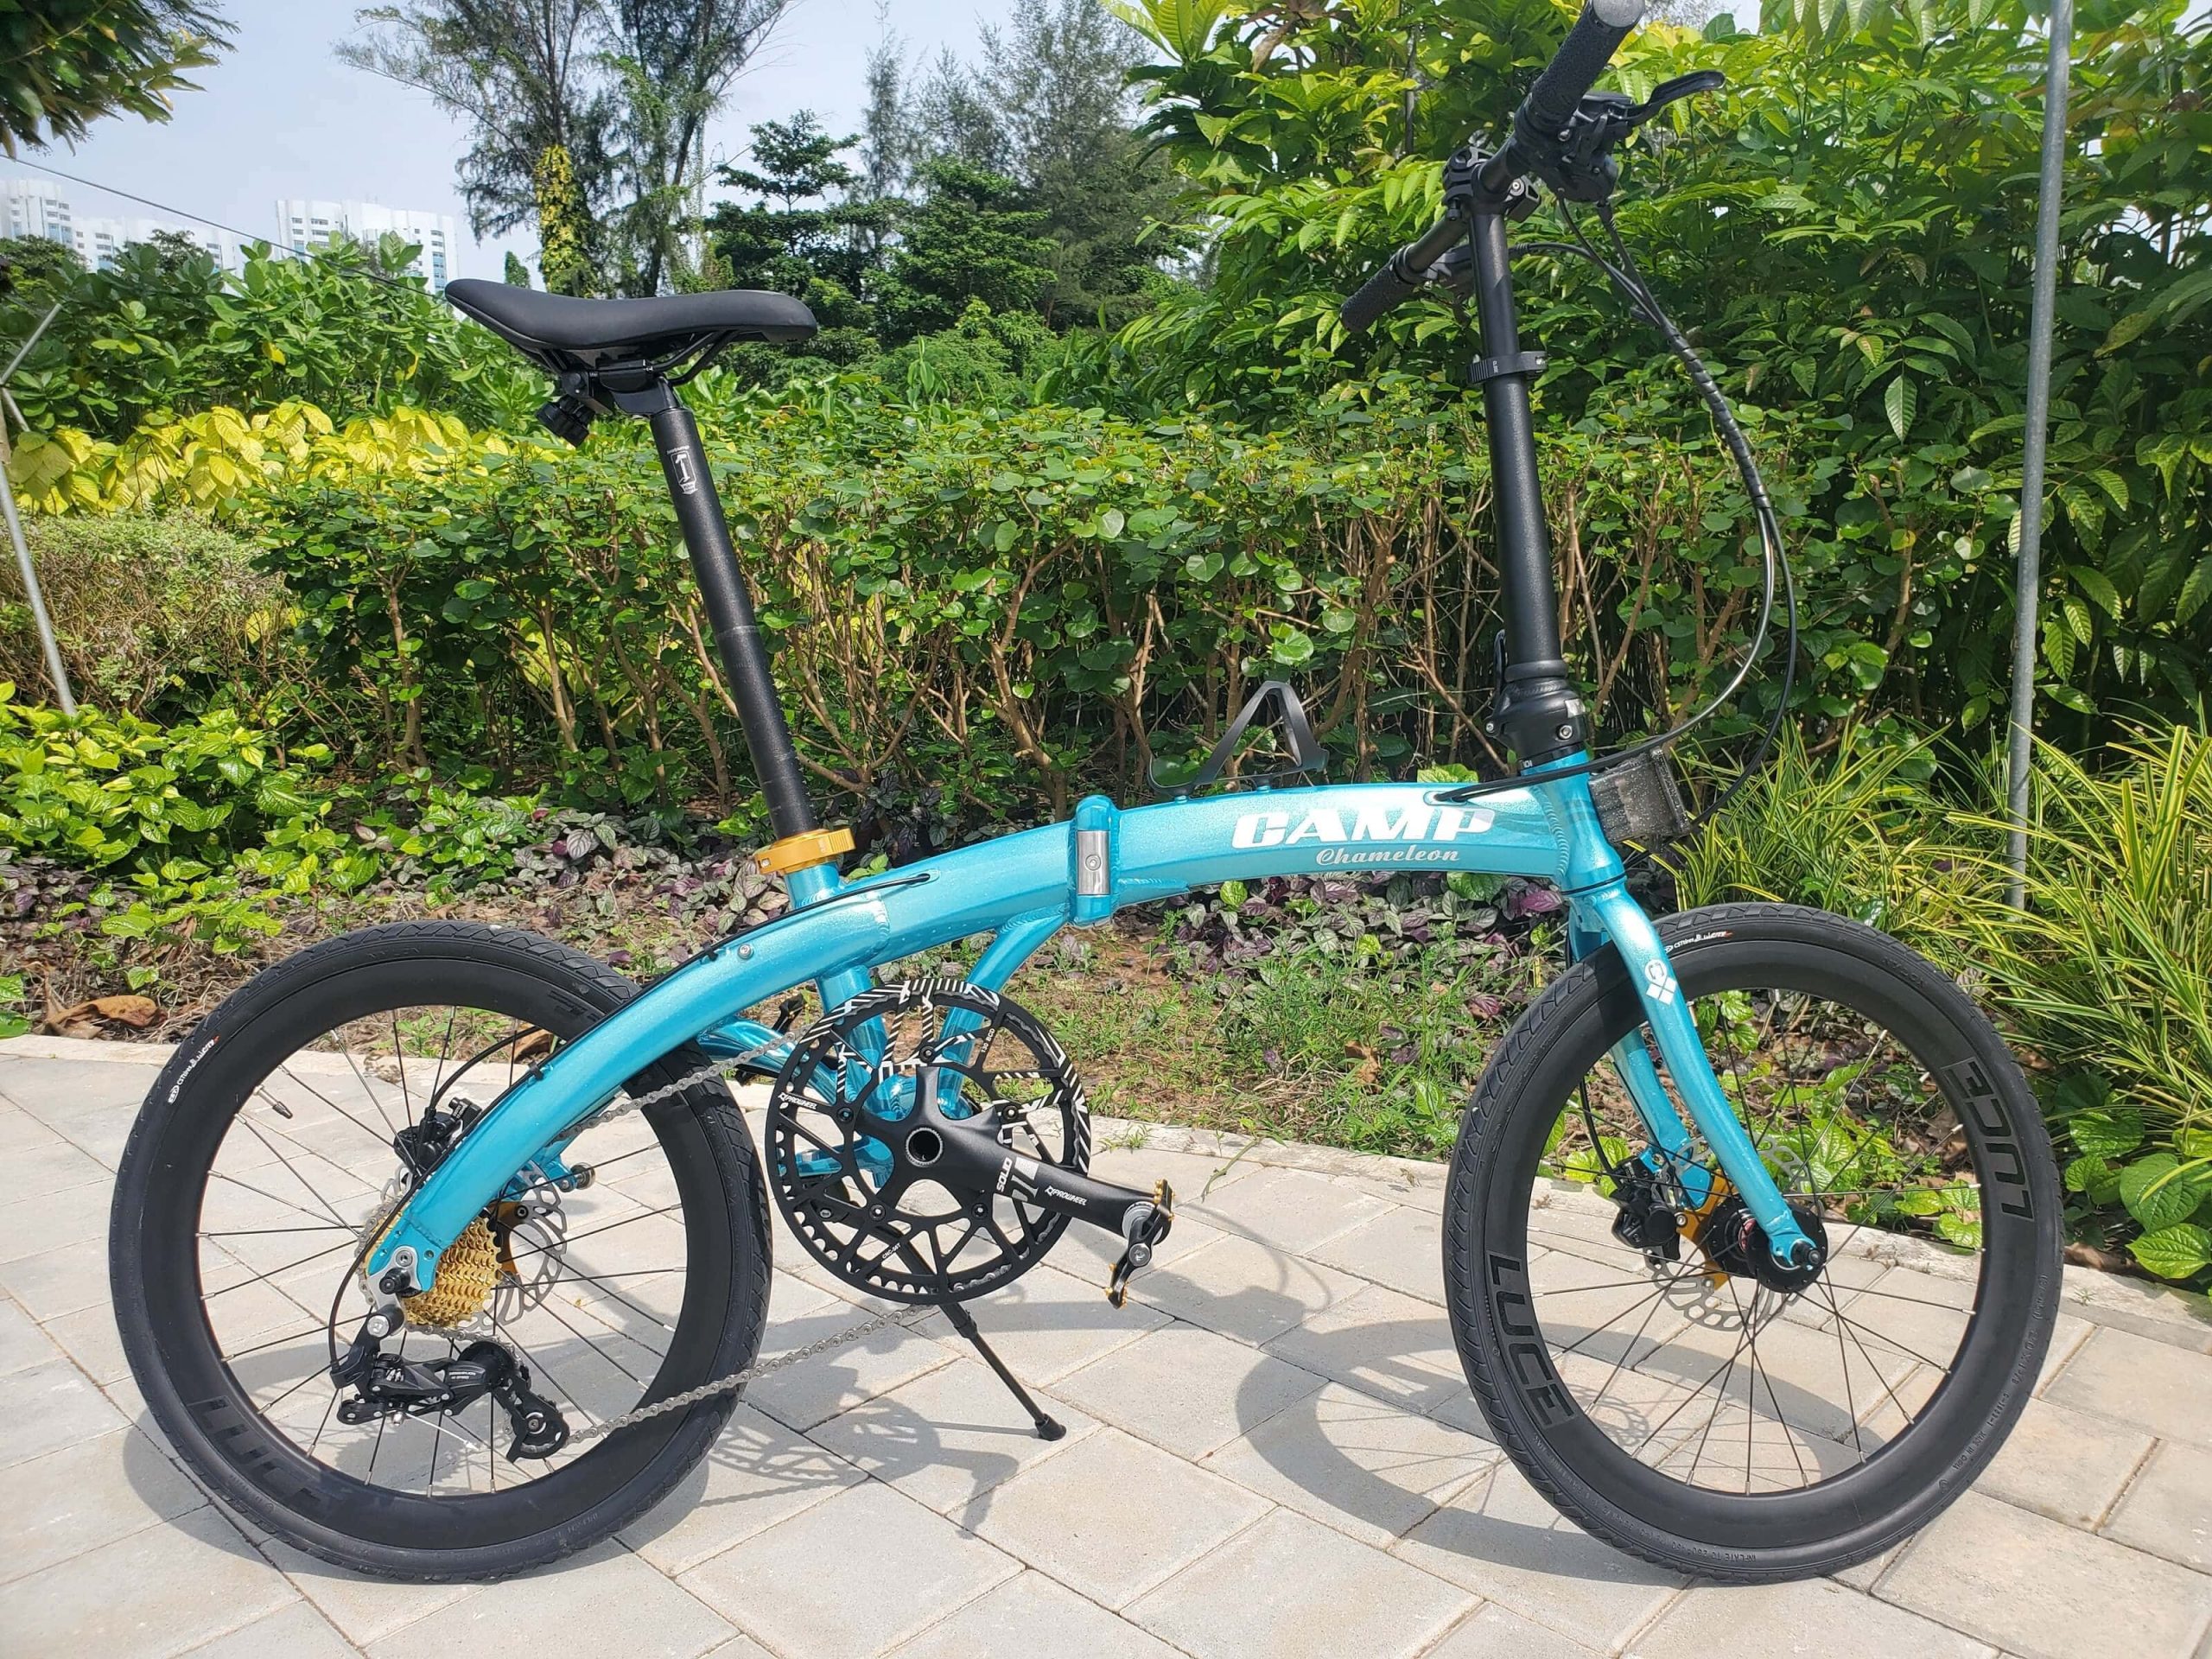 CAMP CHAMELEON (SKY) foldable bicycle right (Nick)